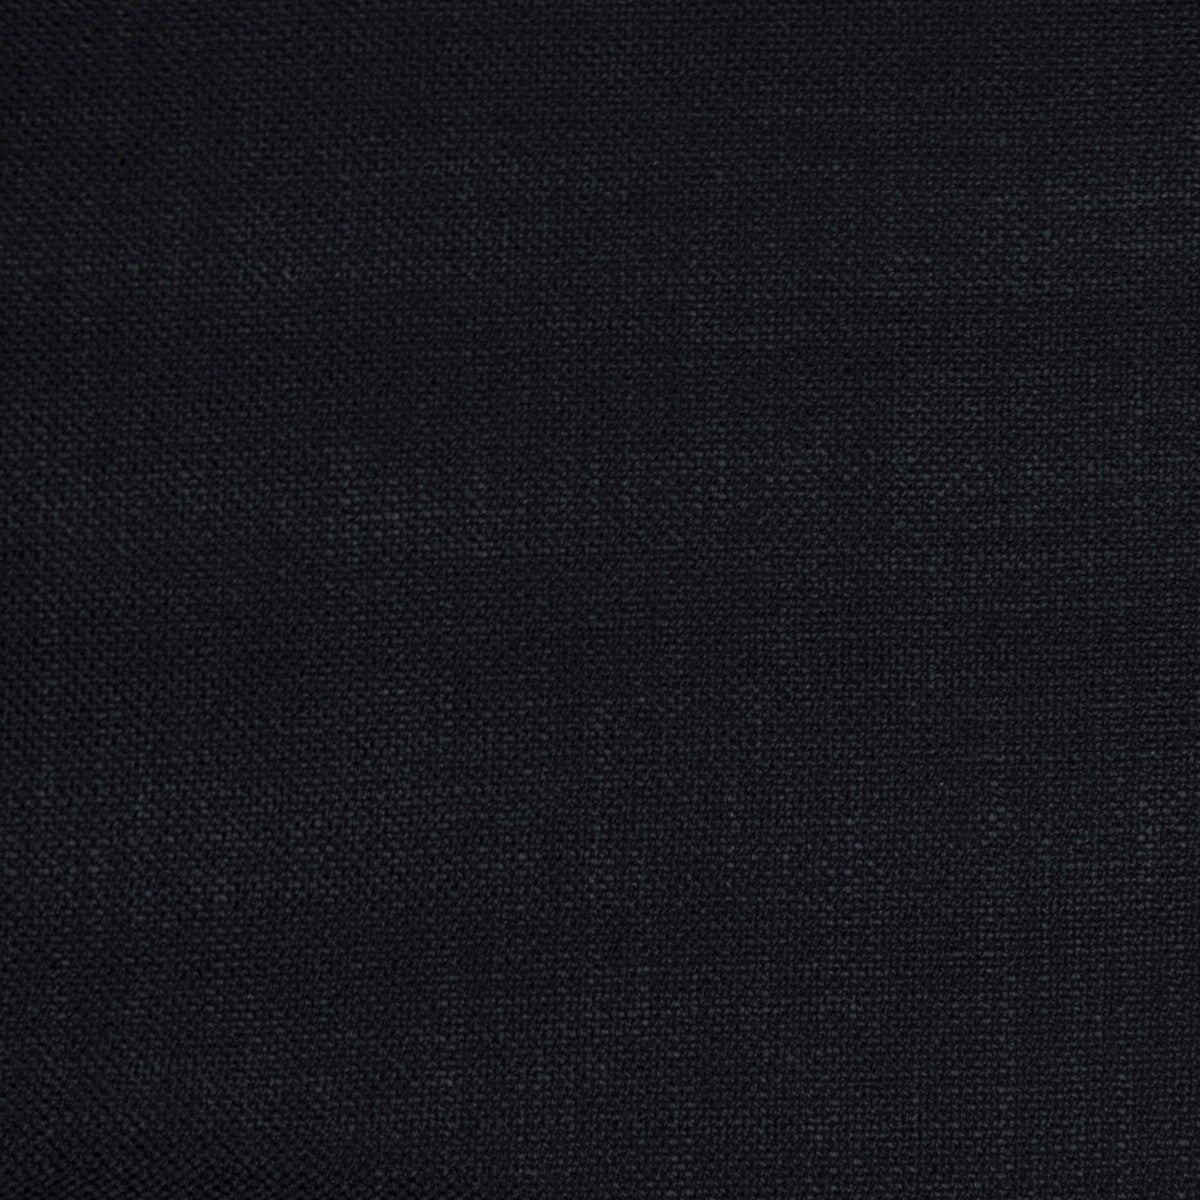 Shaba fabric in black color - pattern GDT5428.8.0 - by Gaston y Daniela in the Gaston Africalia collection